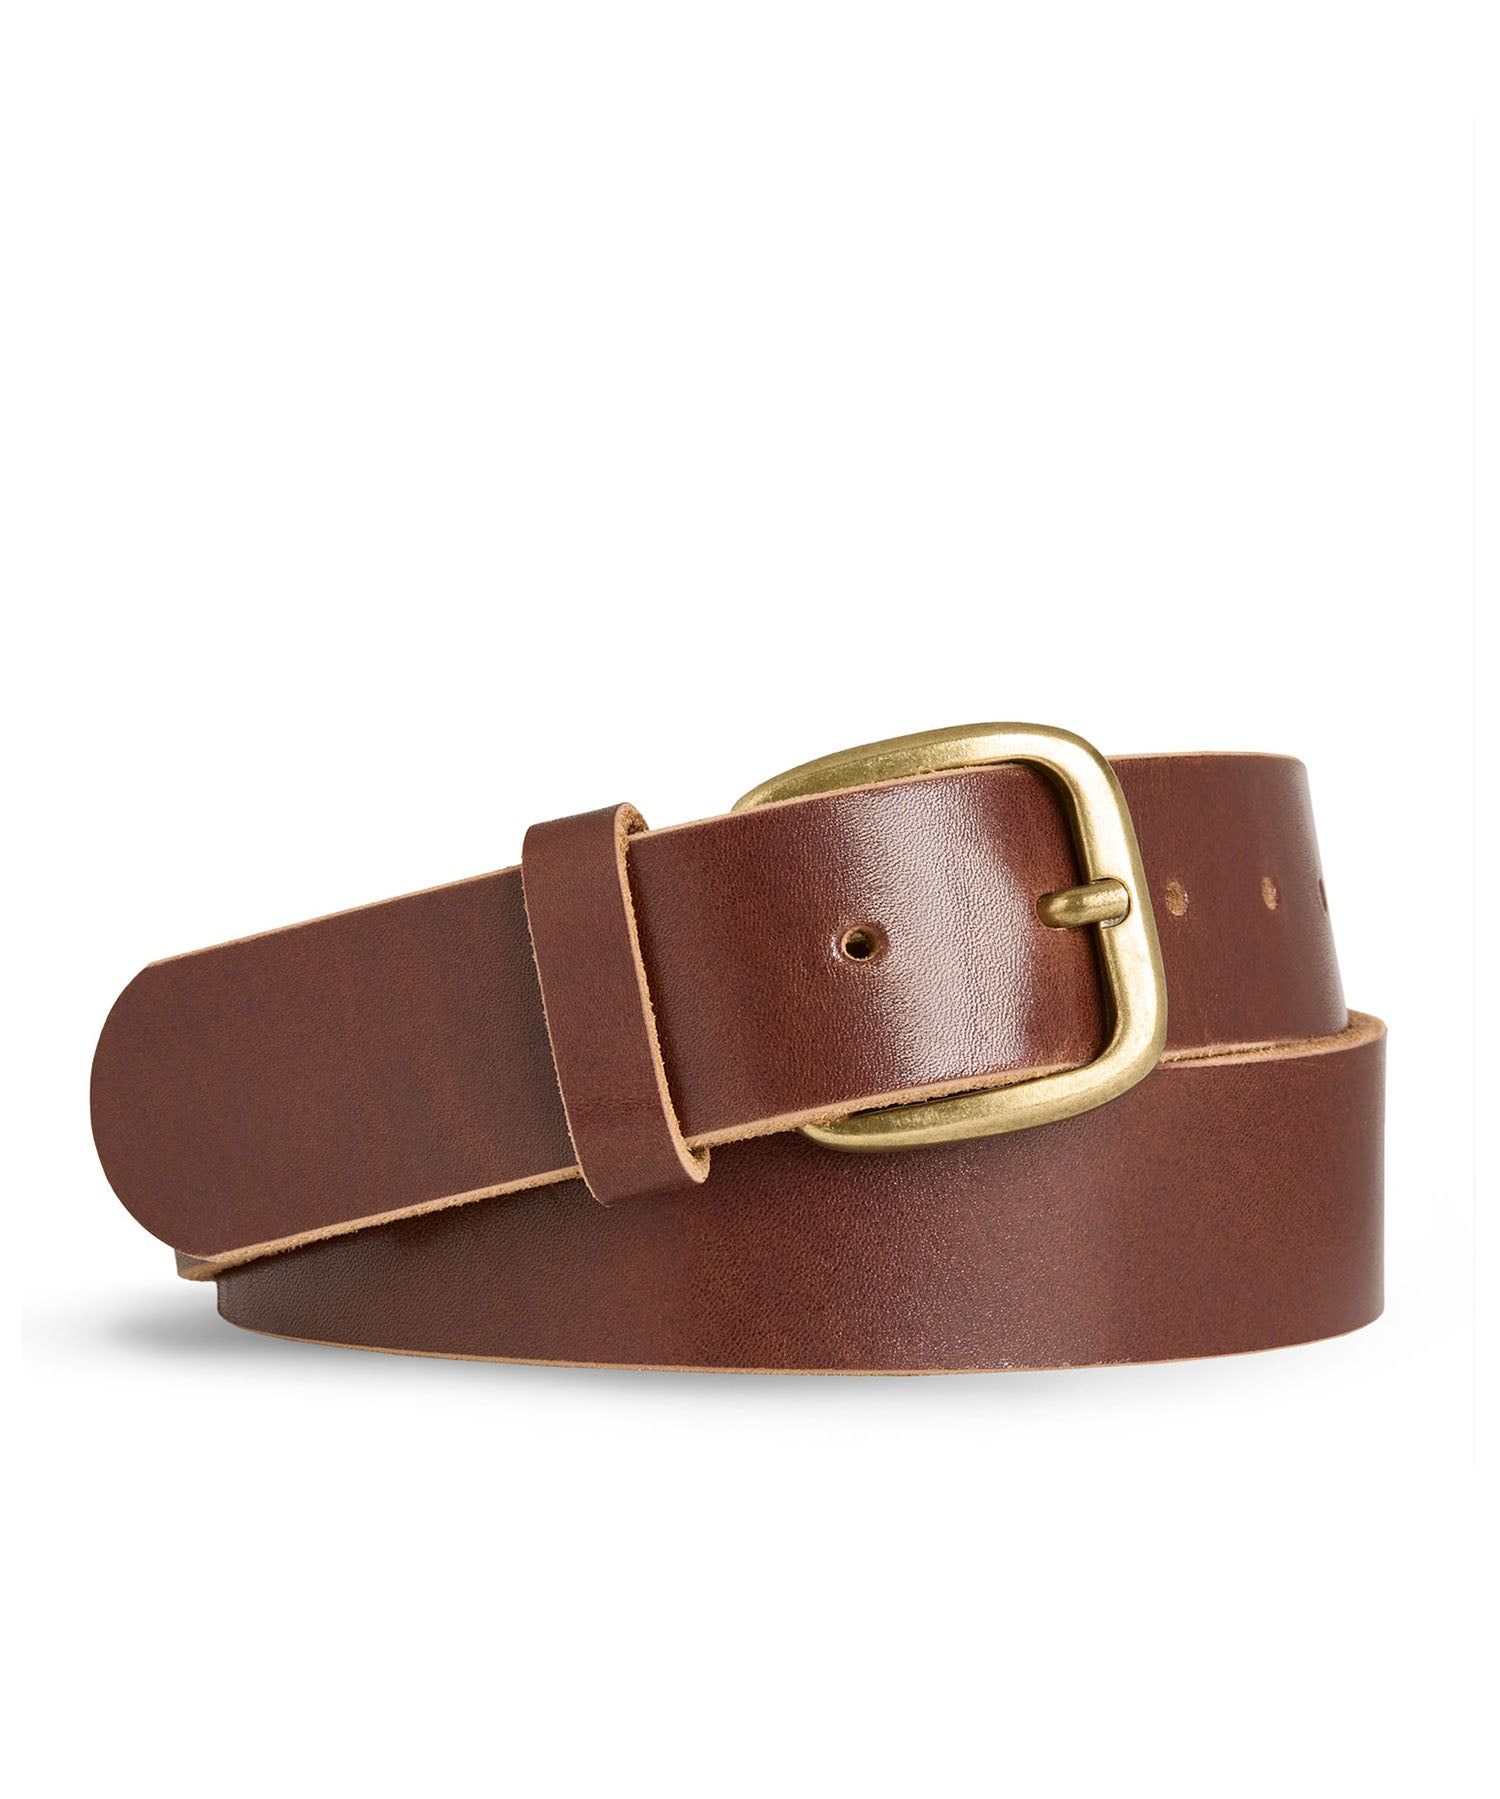 Accessorize with Style: Stylish Mens Belts for Every Outfit